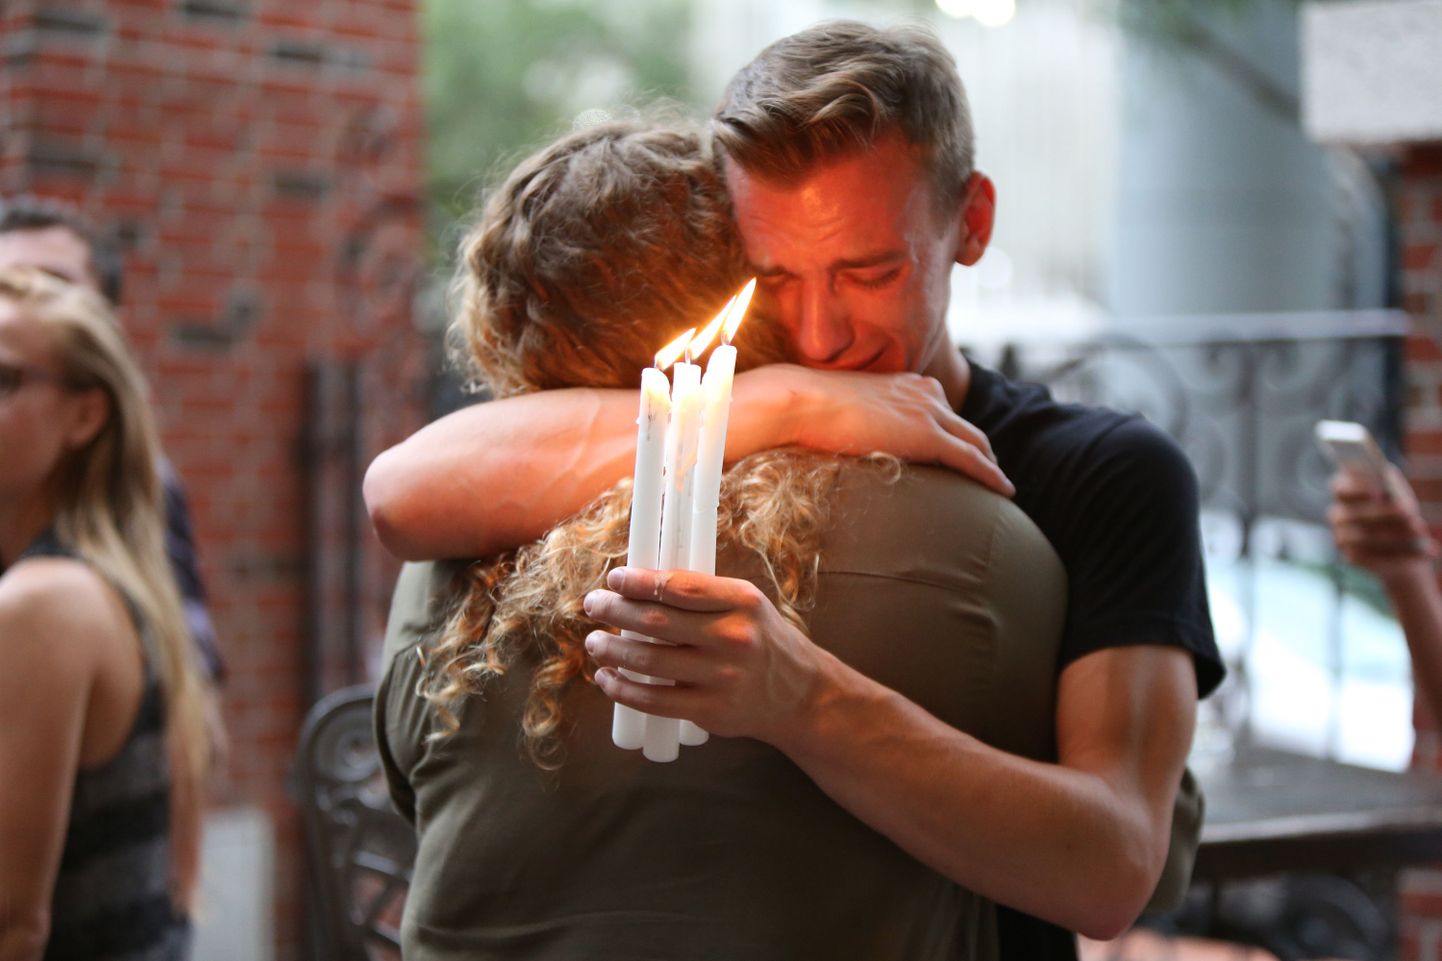 Brett Morian, from Daytona Beach, hugs an attendee during the candlelight vigil at Ember in Orlando, Fla., on Sunday, June 12, 2016. (Photo by Joshua Lim/Orlando Sentinel/TNS) *** Please Use Credit from Credit Field ***